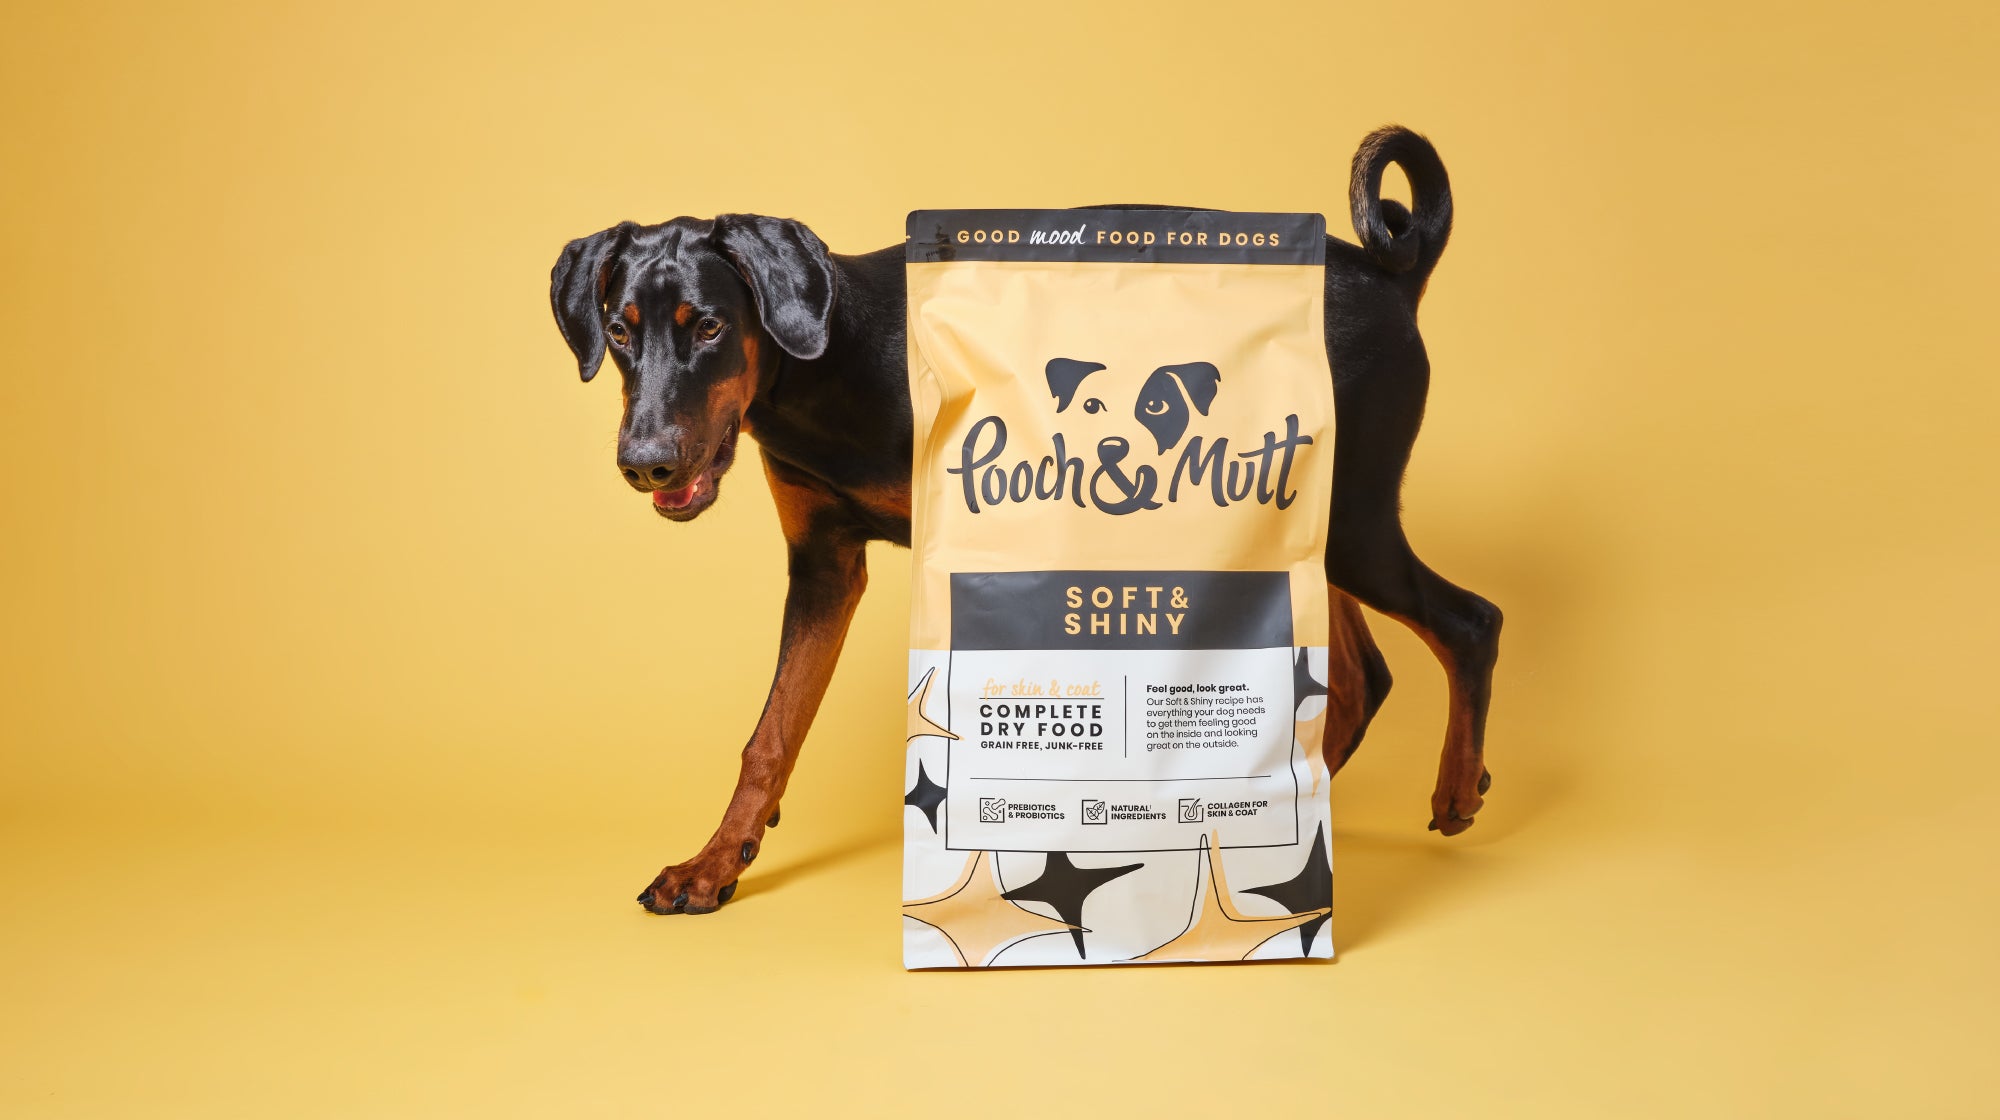 doberman dog next a bag of dry dog food on a yellow background